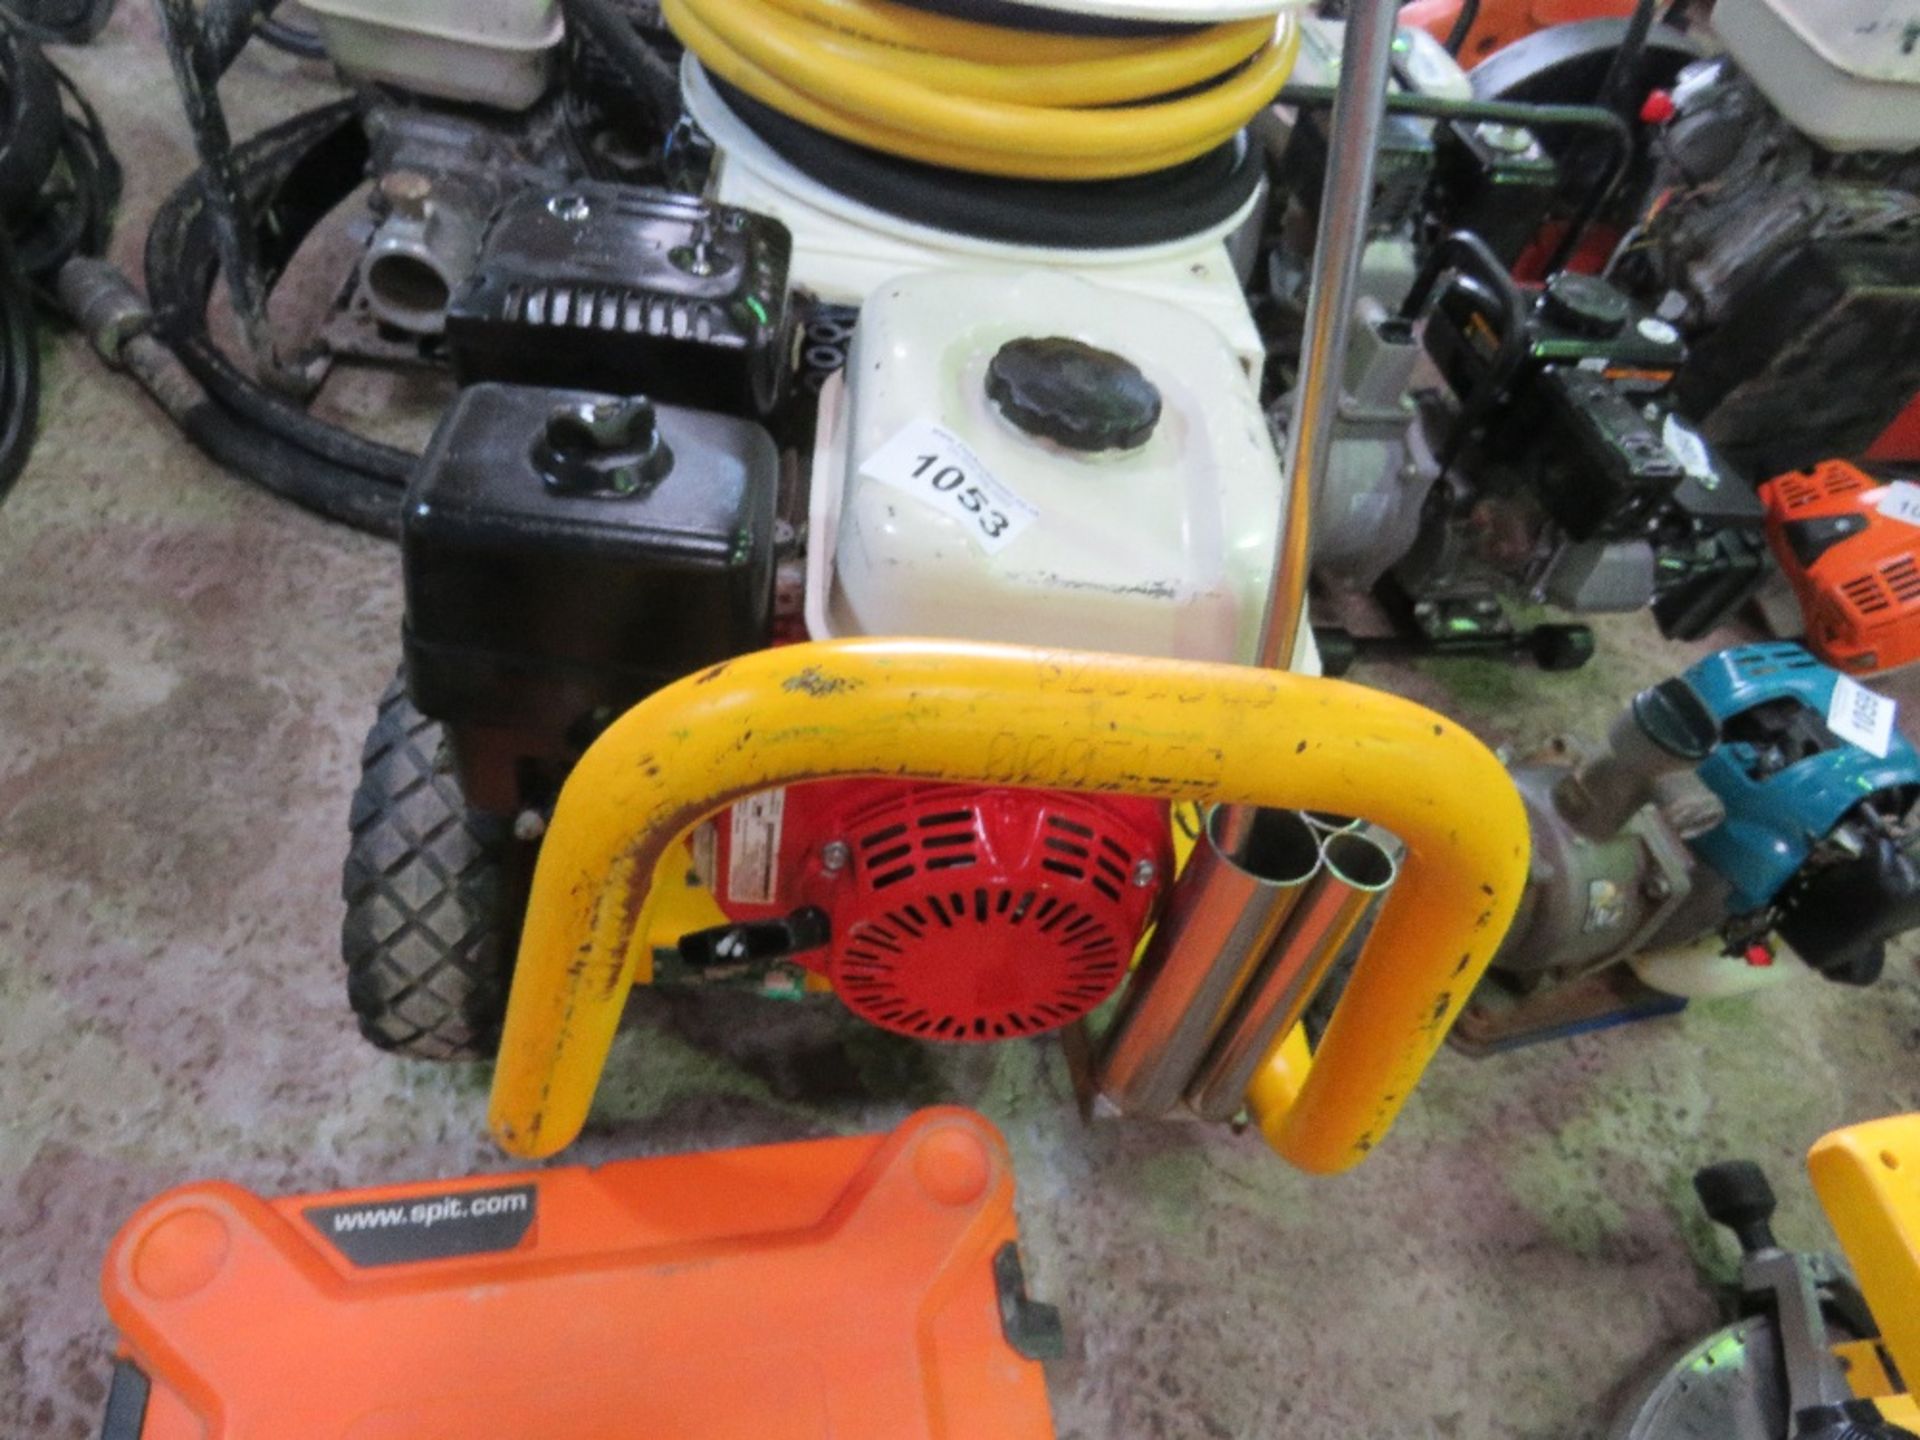 BRENDON PETROL ENGINED POWER WASHER. - Image 2 of 3